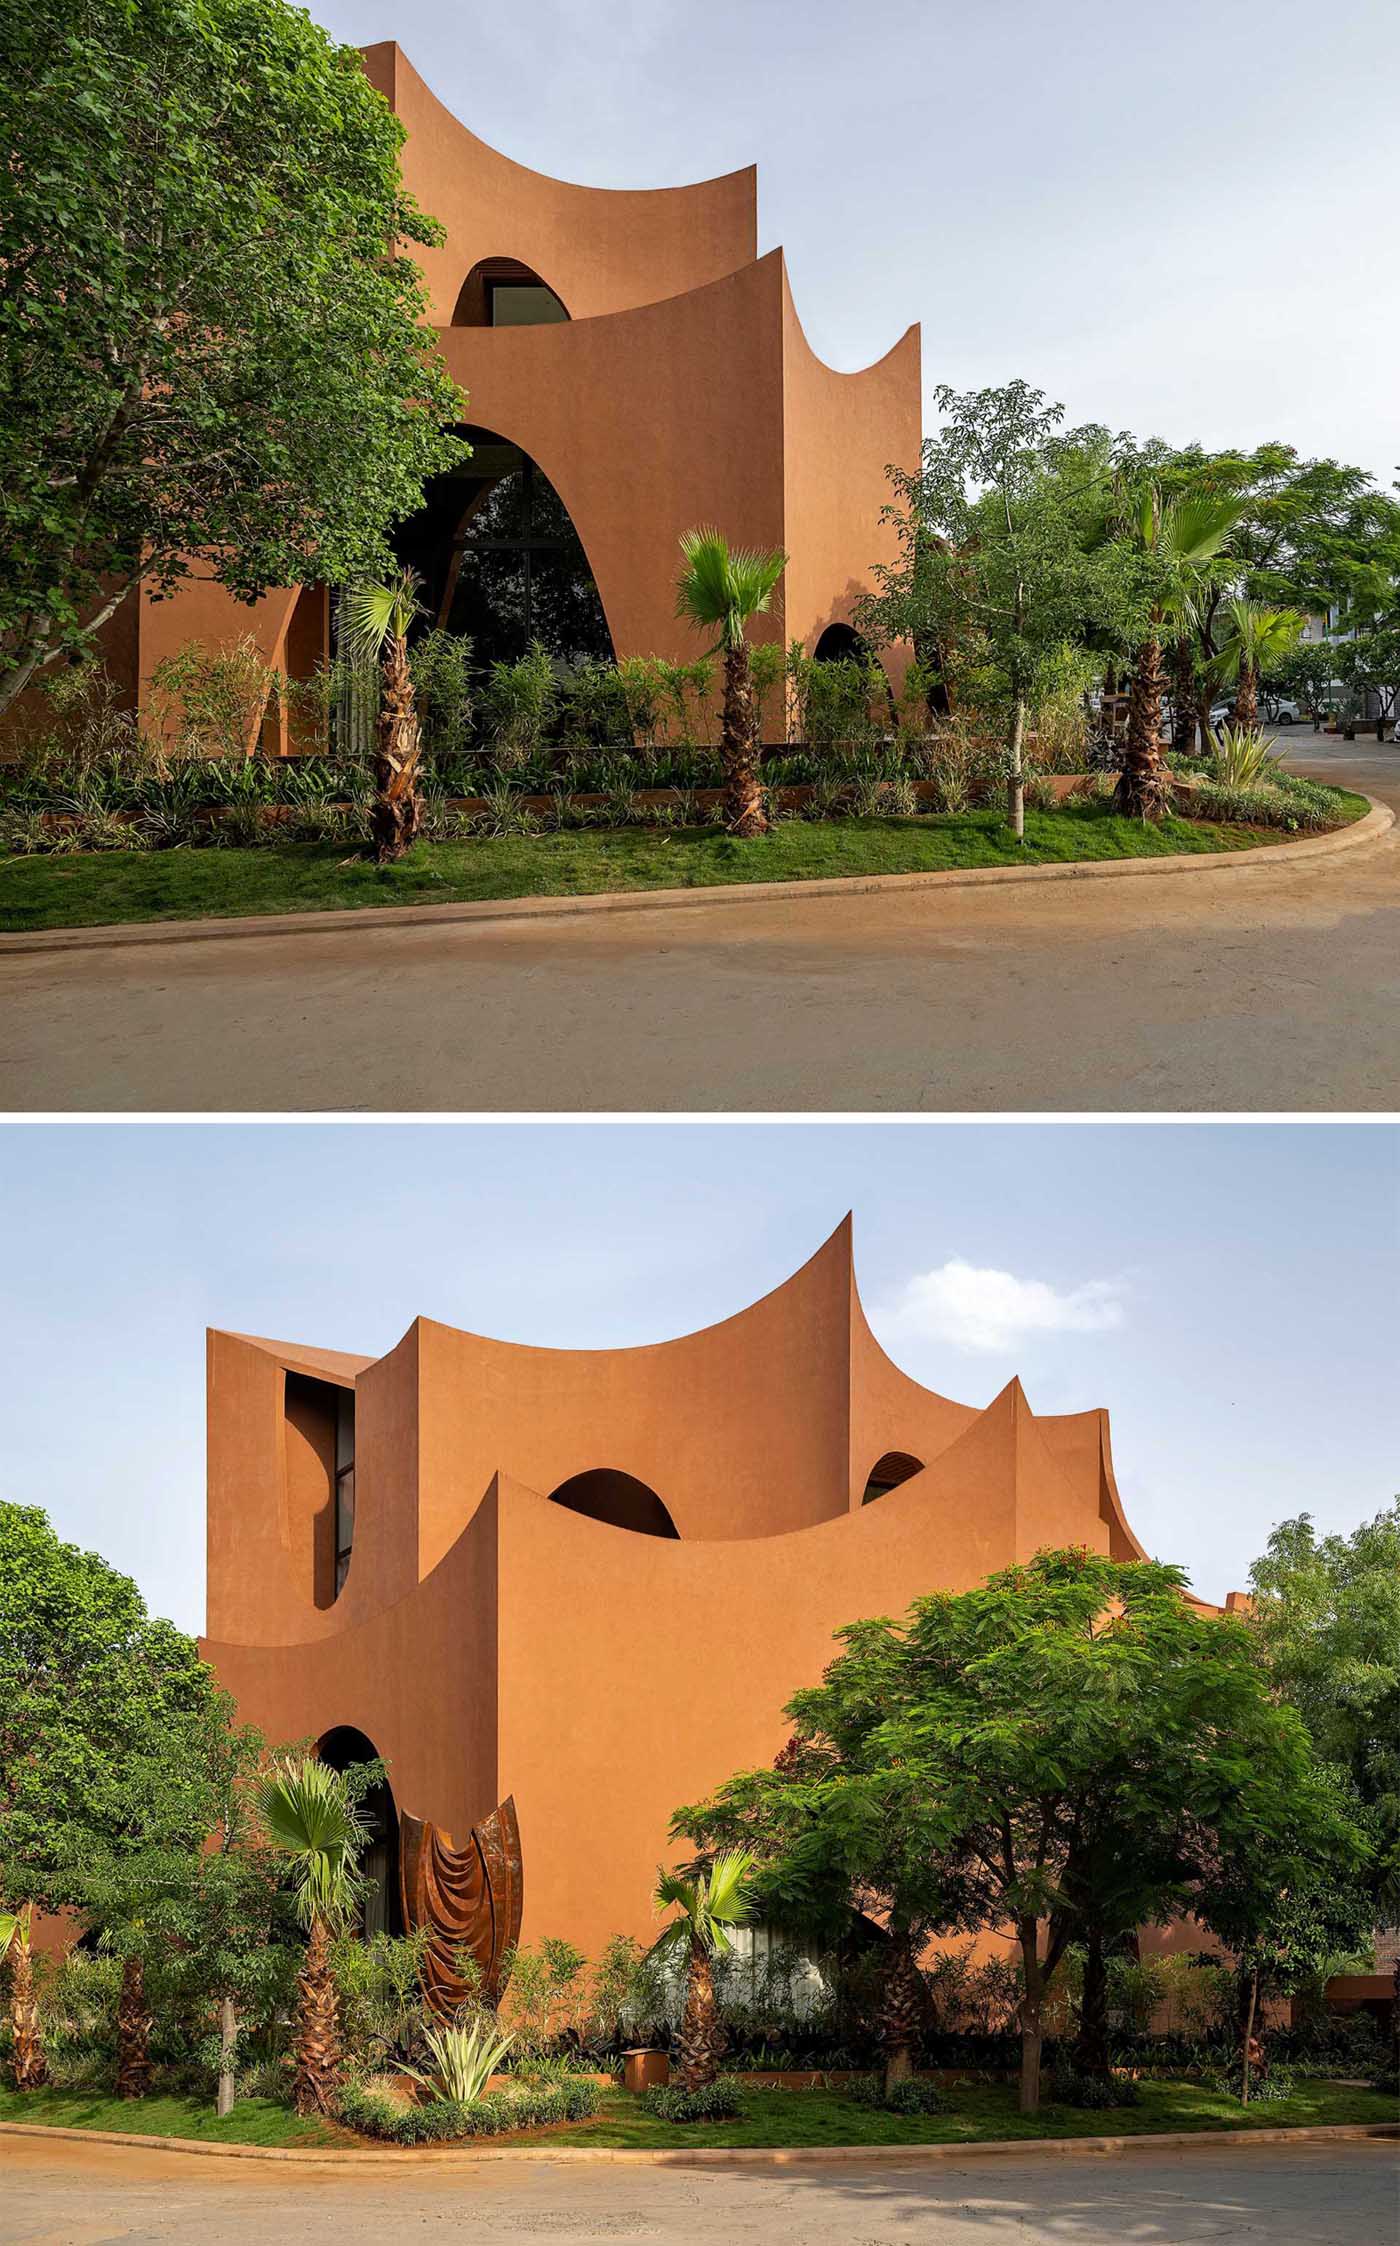 A sculptural modern house with arches scattered throughout its design.